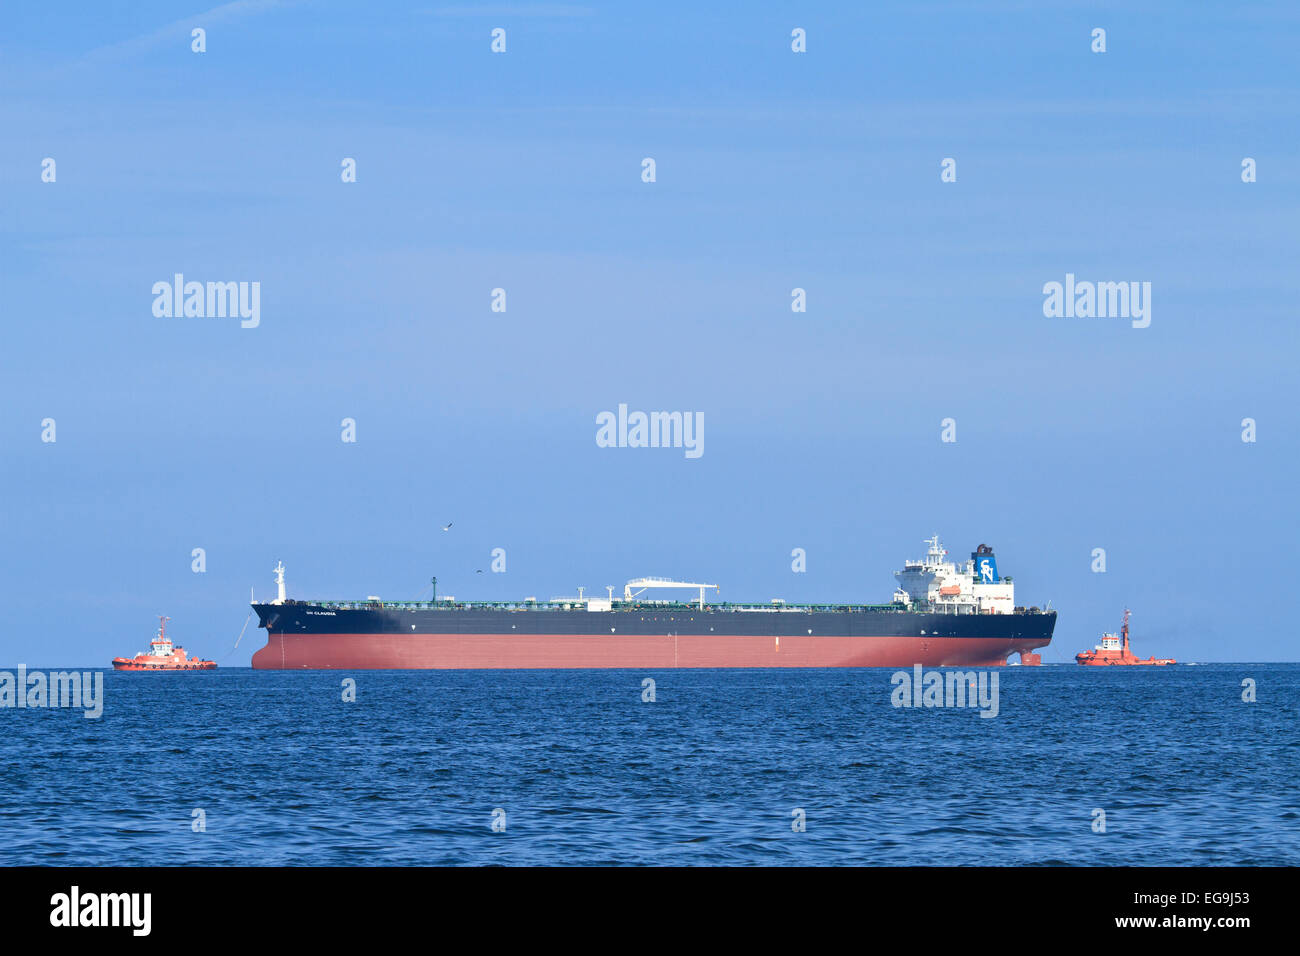 Two tug boats are moving the ship from the harbor to the sea. Stock Photo